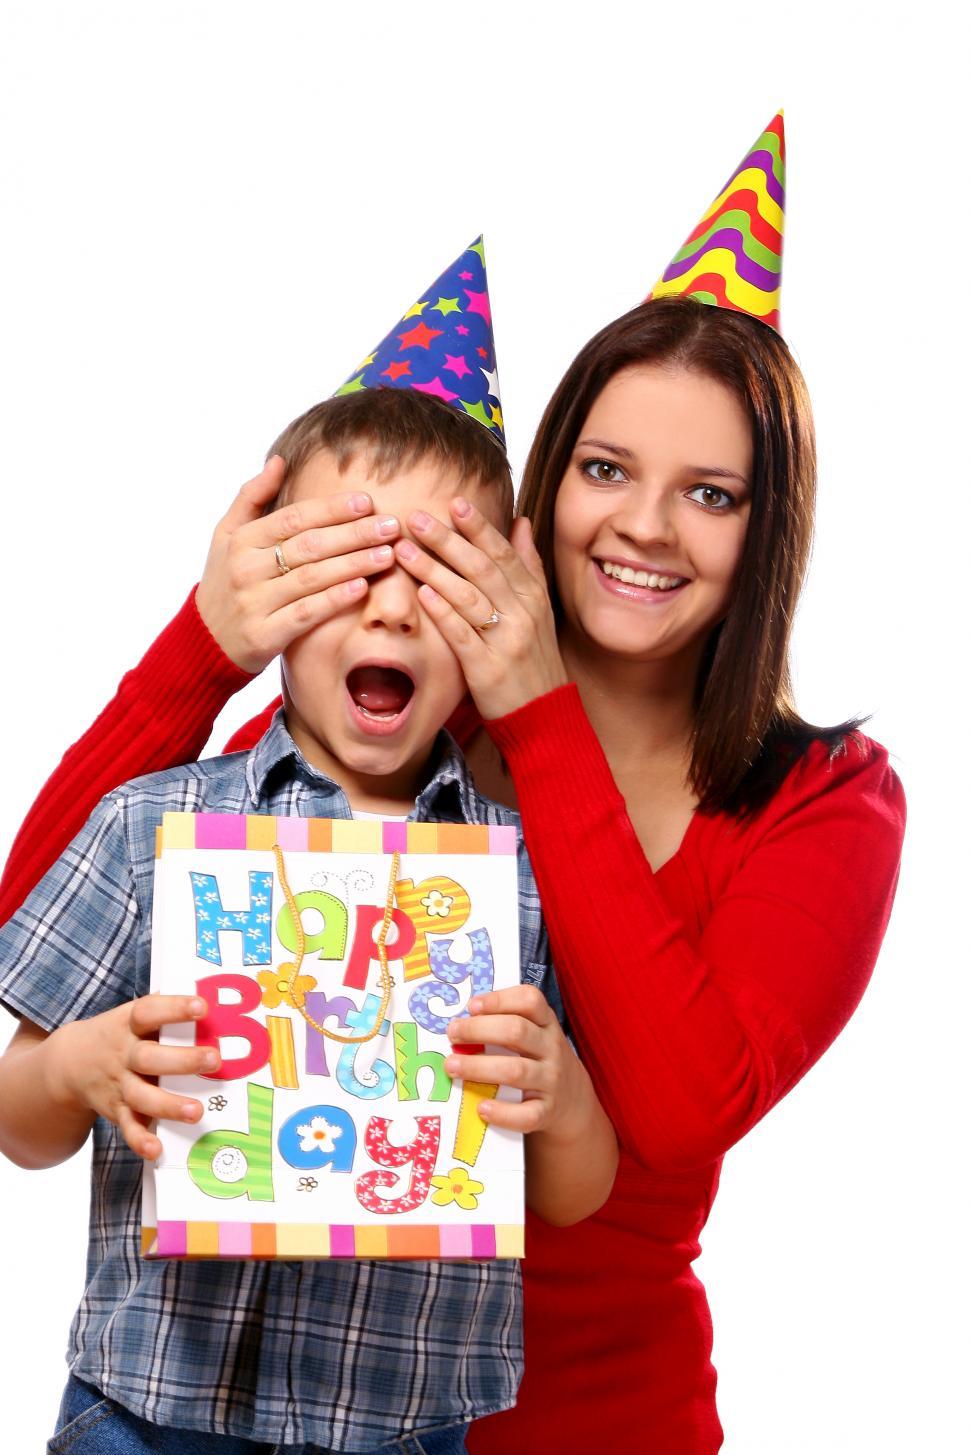 Free Image of young mother with son - covering eyes in party hat 